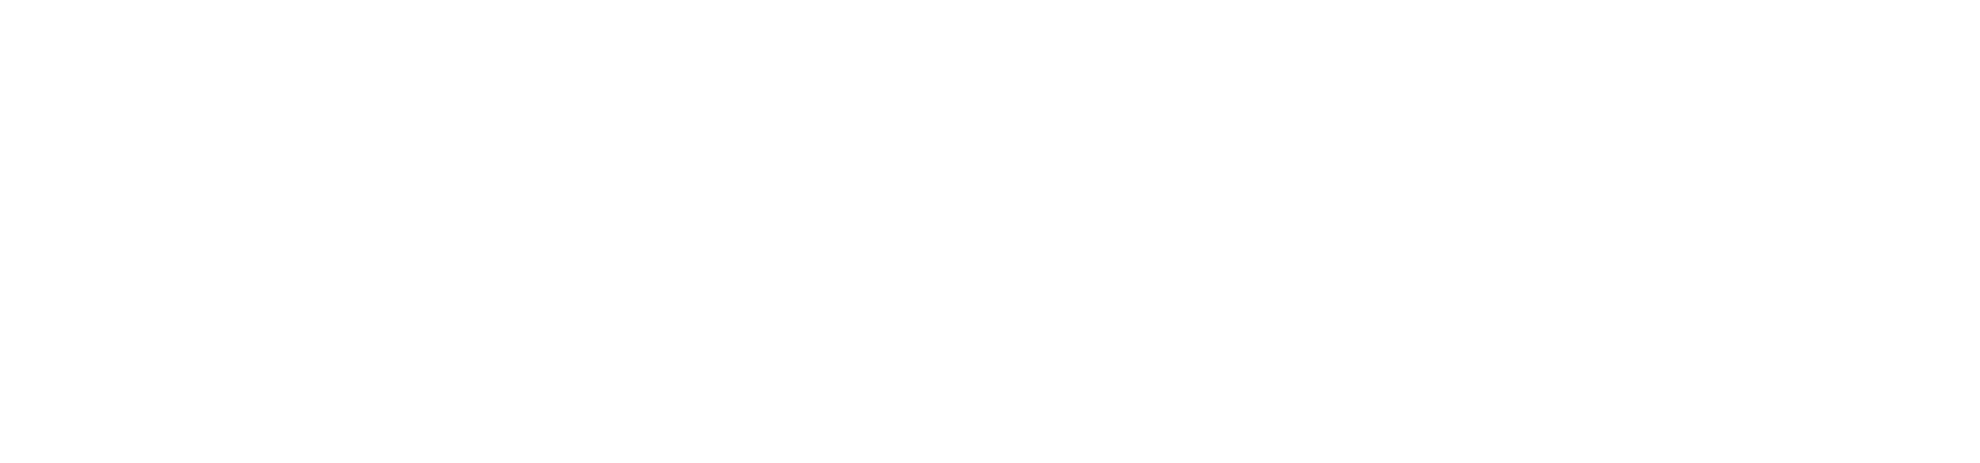 Dueling Axes